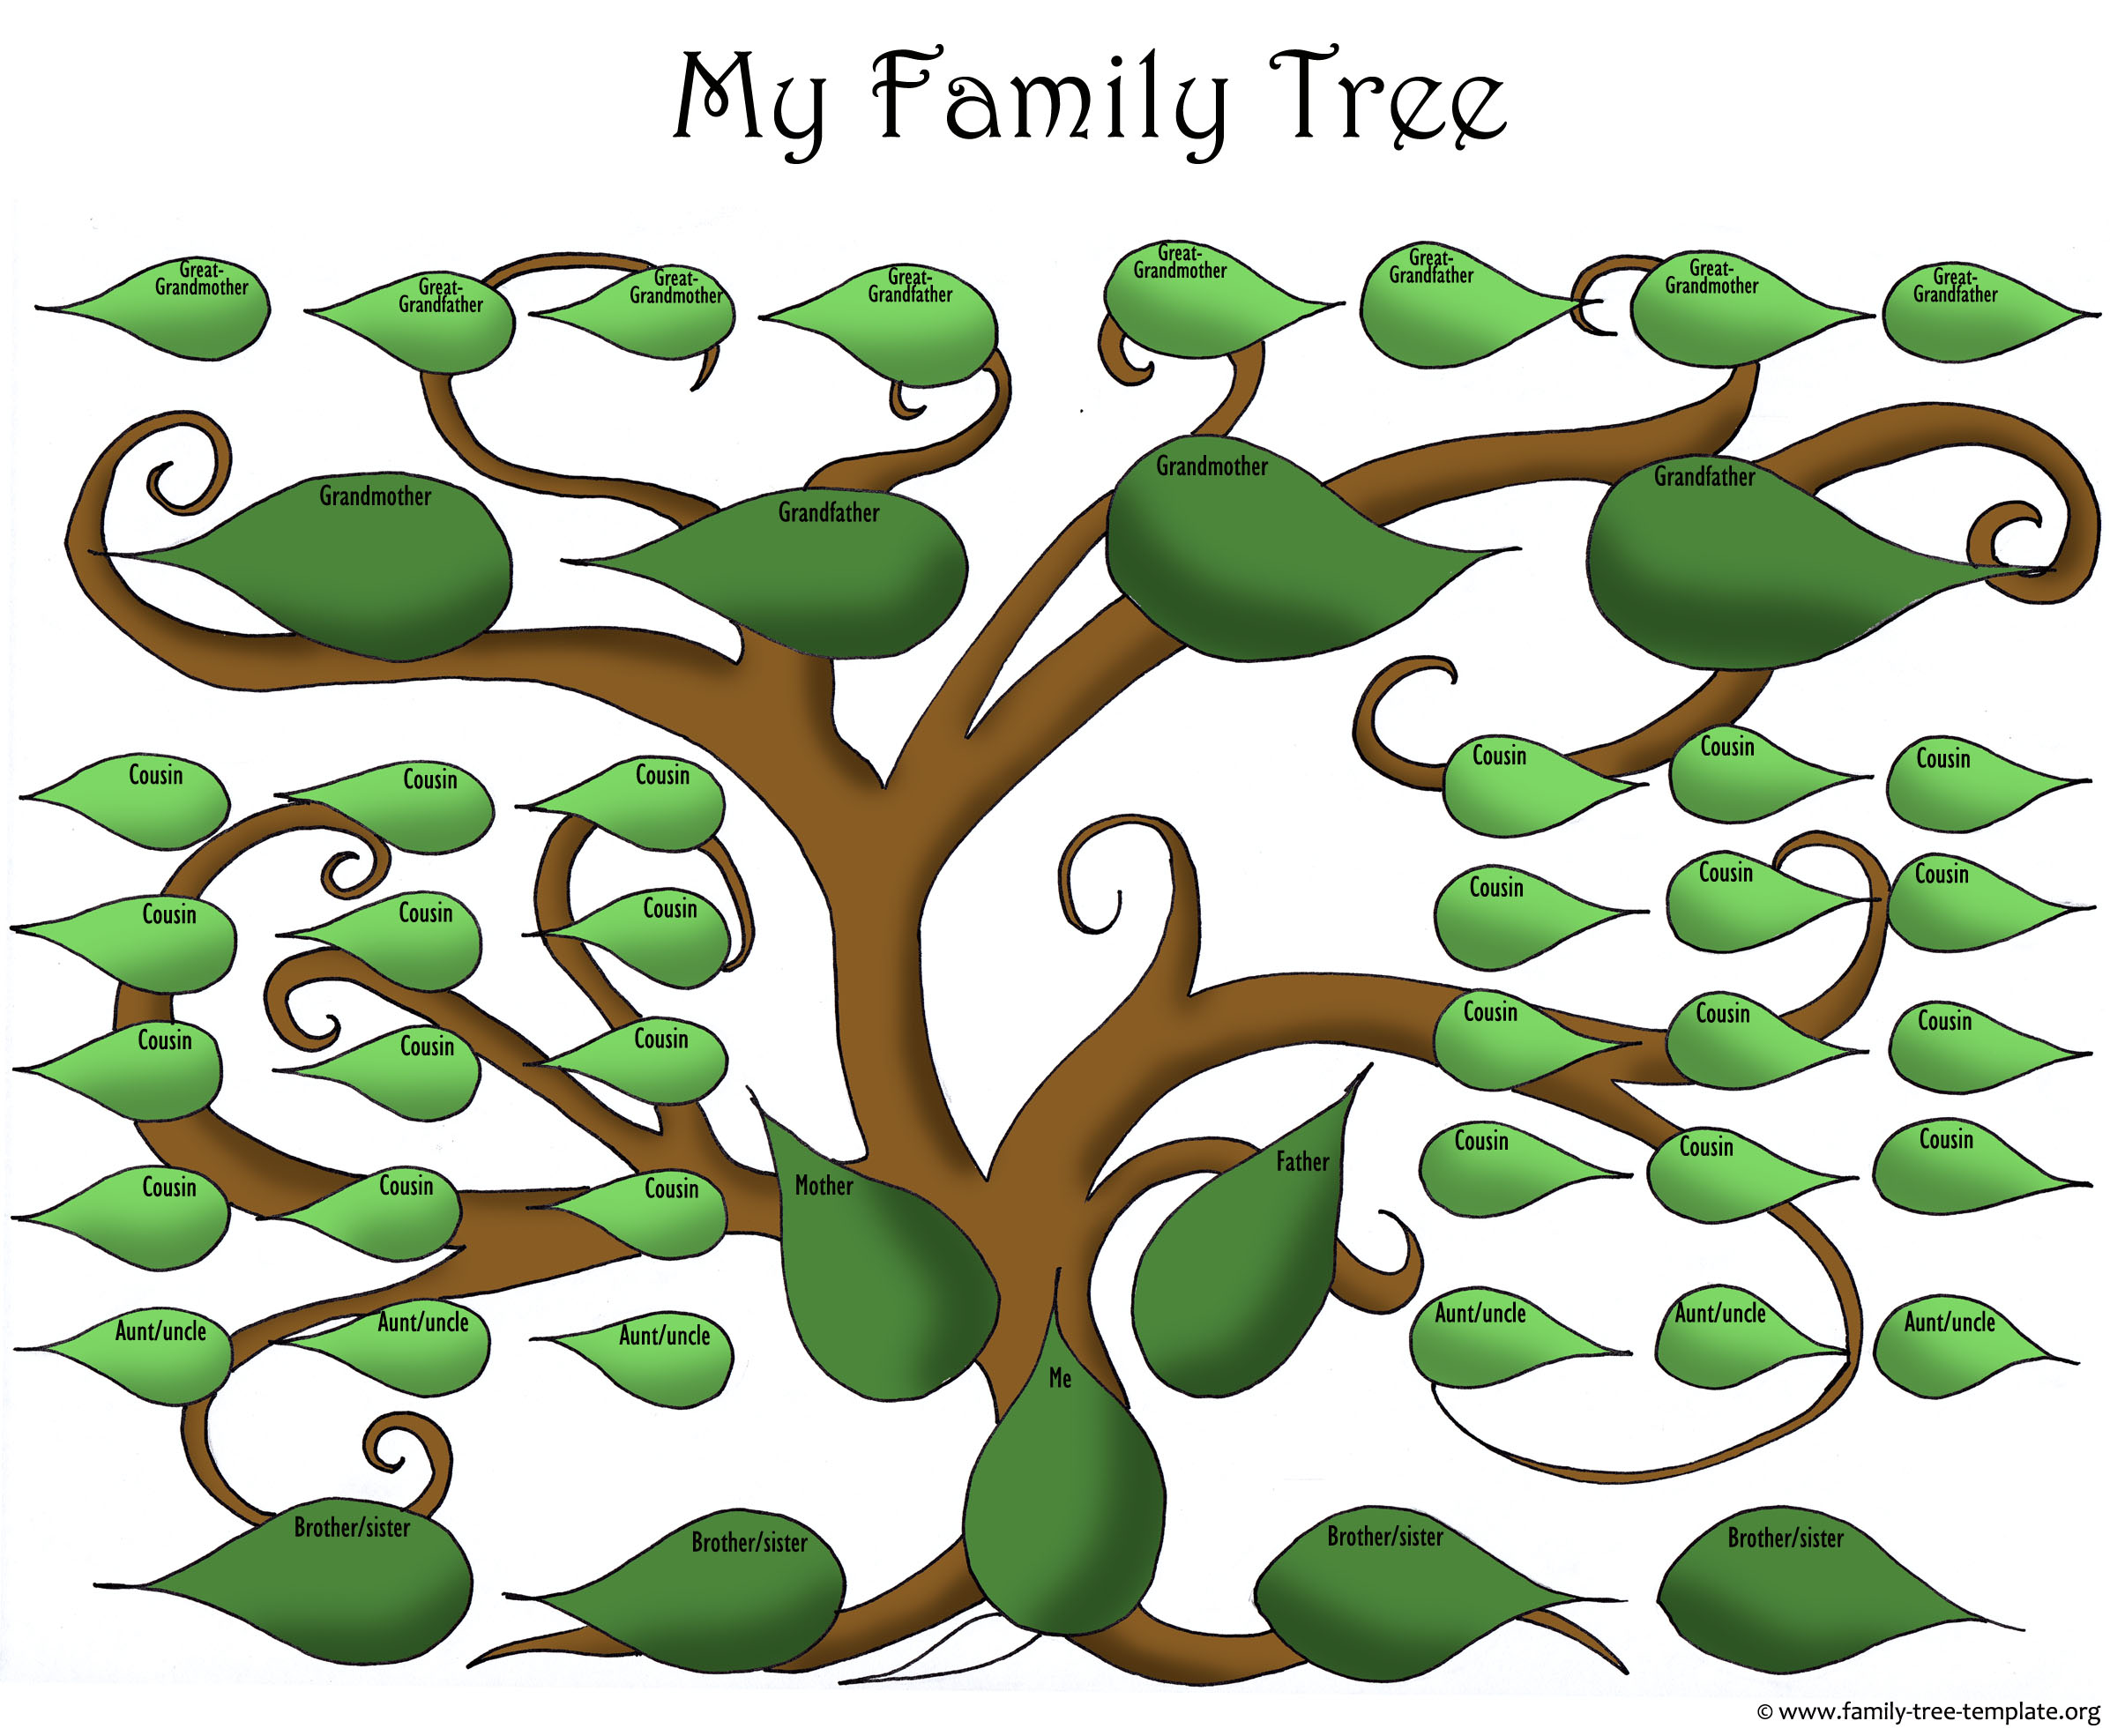 Artistic blank printable family tree template for the big family with lots of kids.